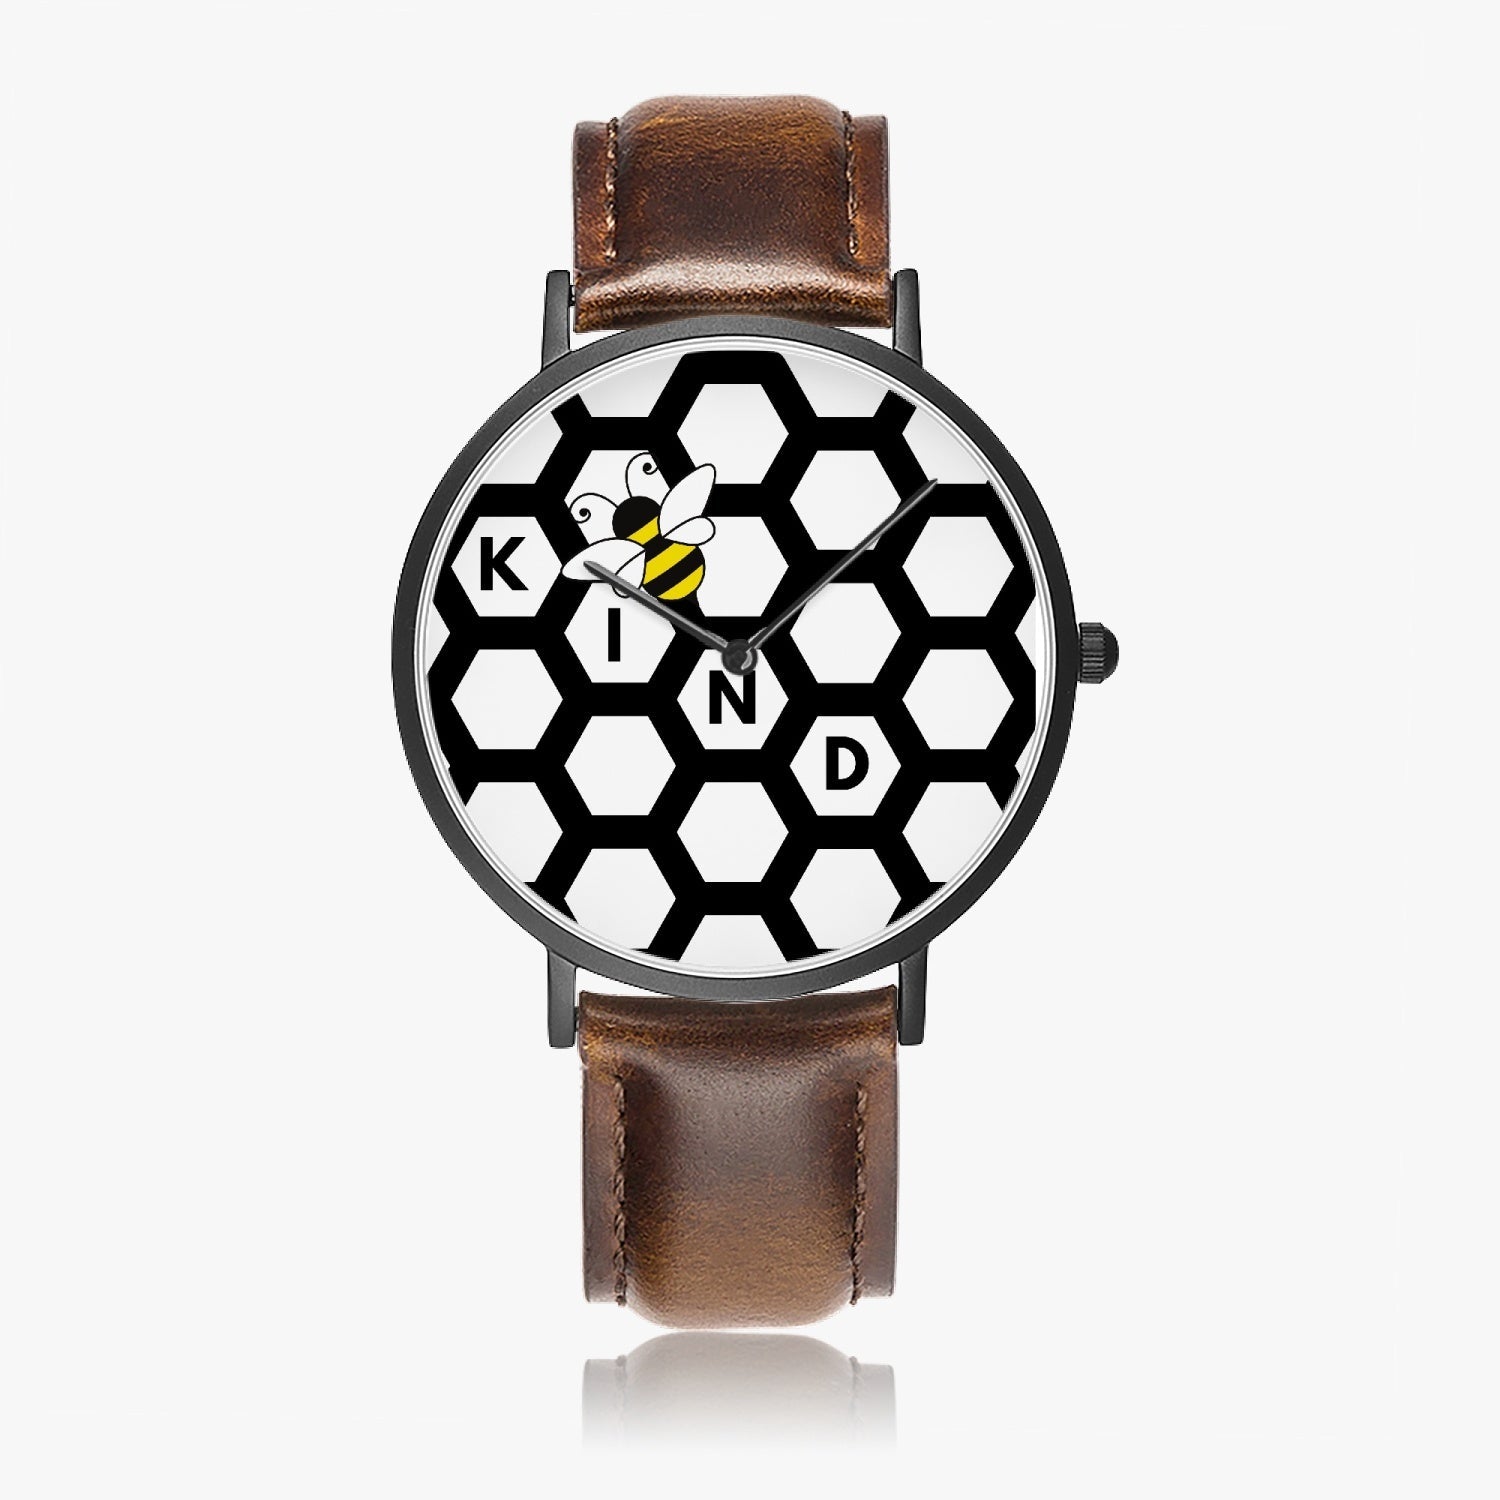 Be Kind Ultra-Thin Leather Strap Quartz Watch - The Kindness Cause Unique Shops Near Me